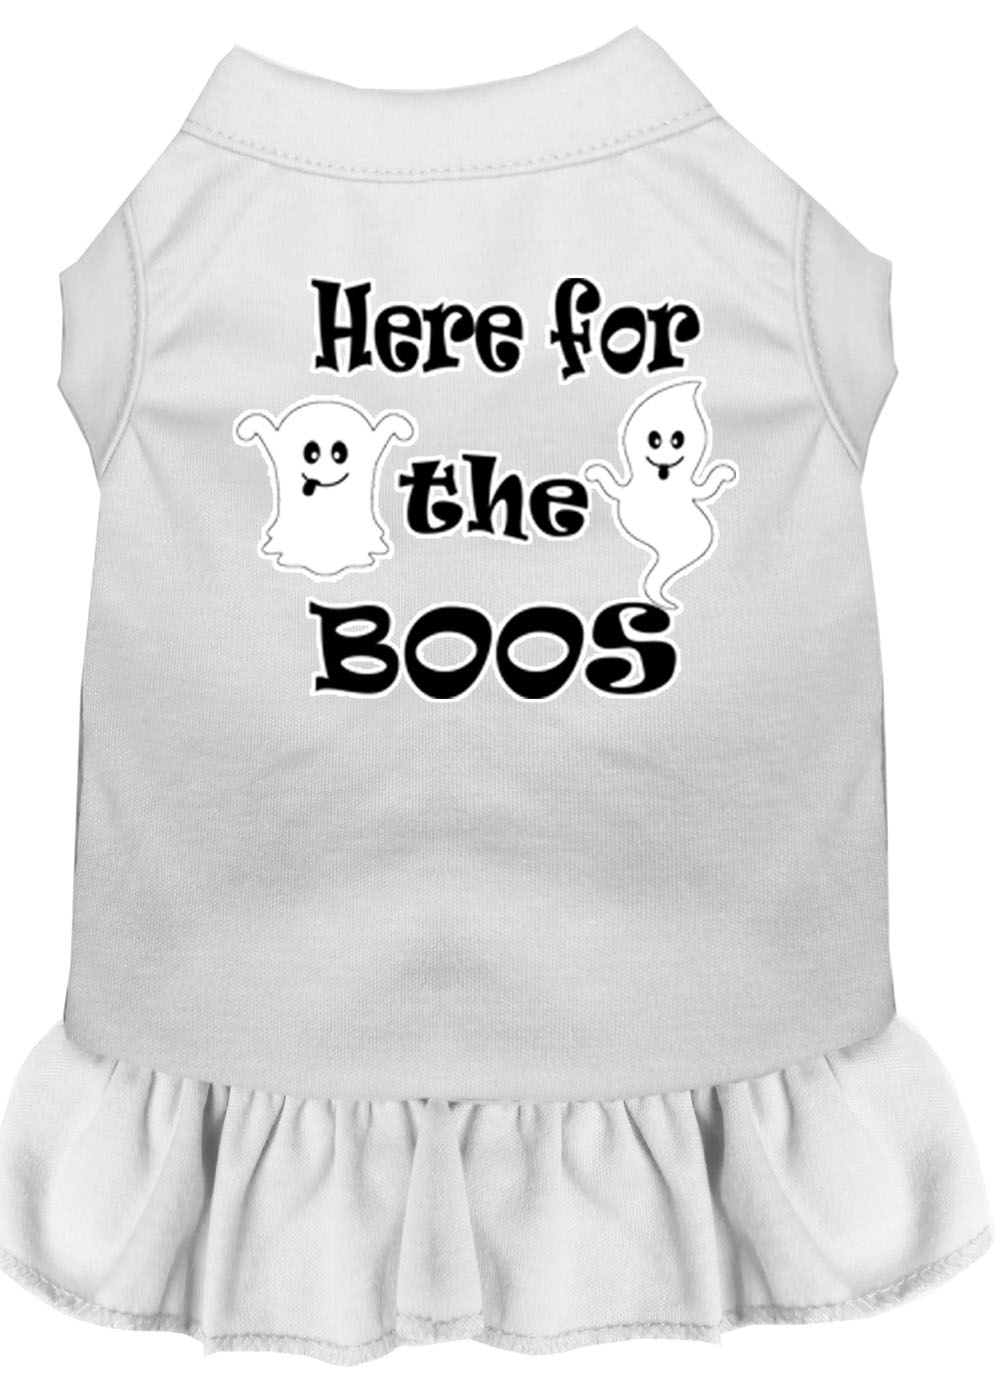 Here for the Boos Screen Print Dog Dress White XL